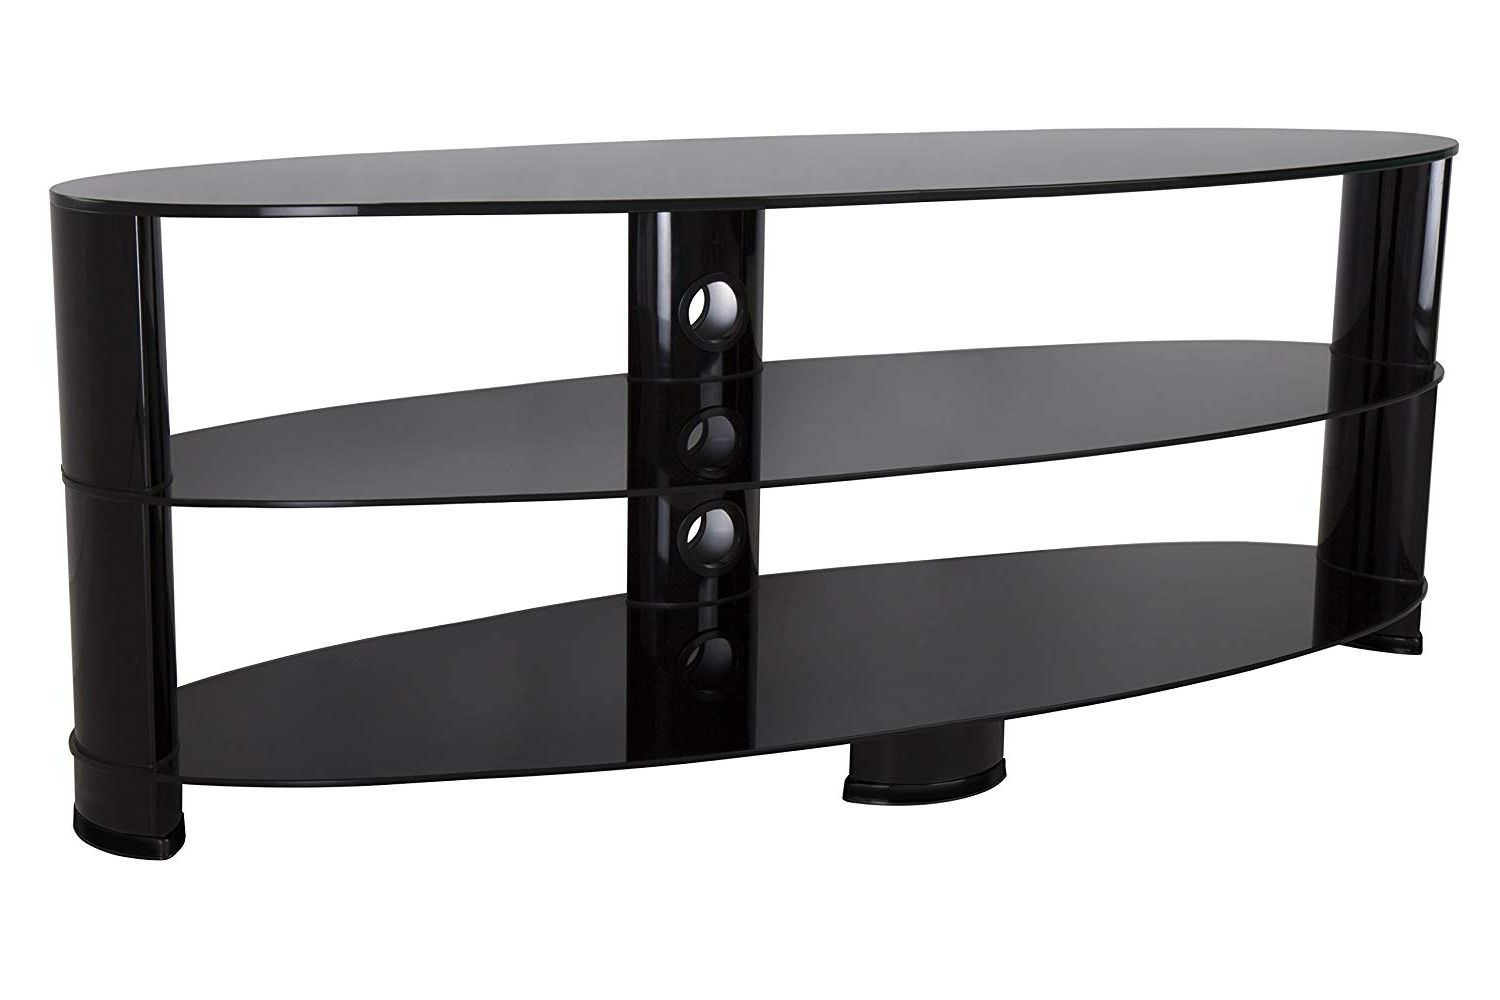 Amazon: Avf Ovl1400bb A Tv Stand Glass Shelves Tvs Up To 65 Inch In 2017 Tv Stands For Tube Tvs (View 10 of 20)